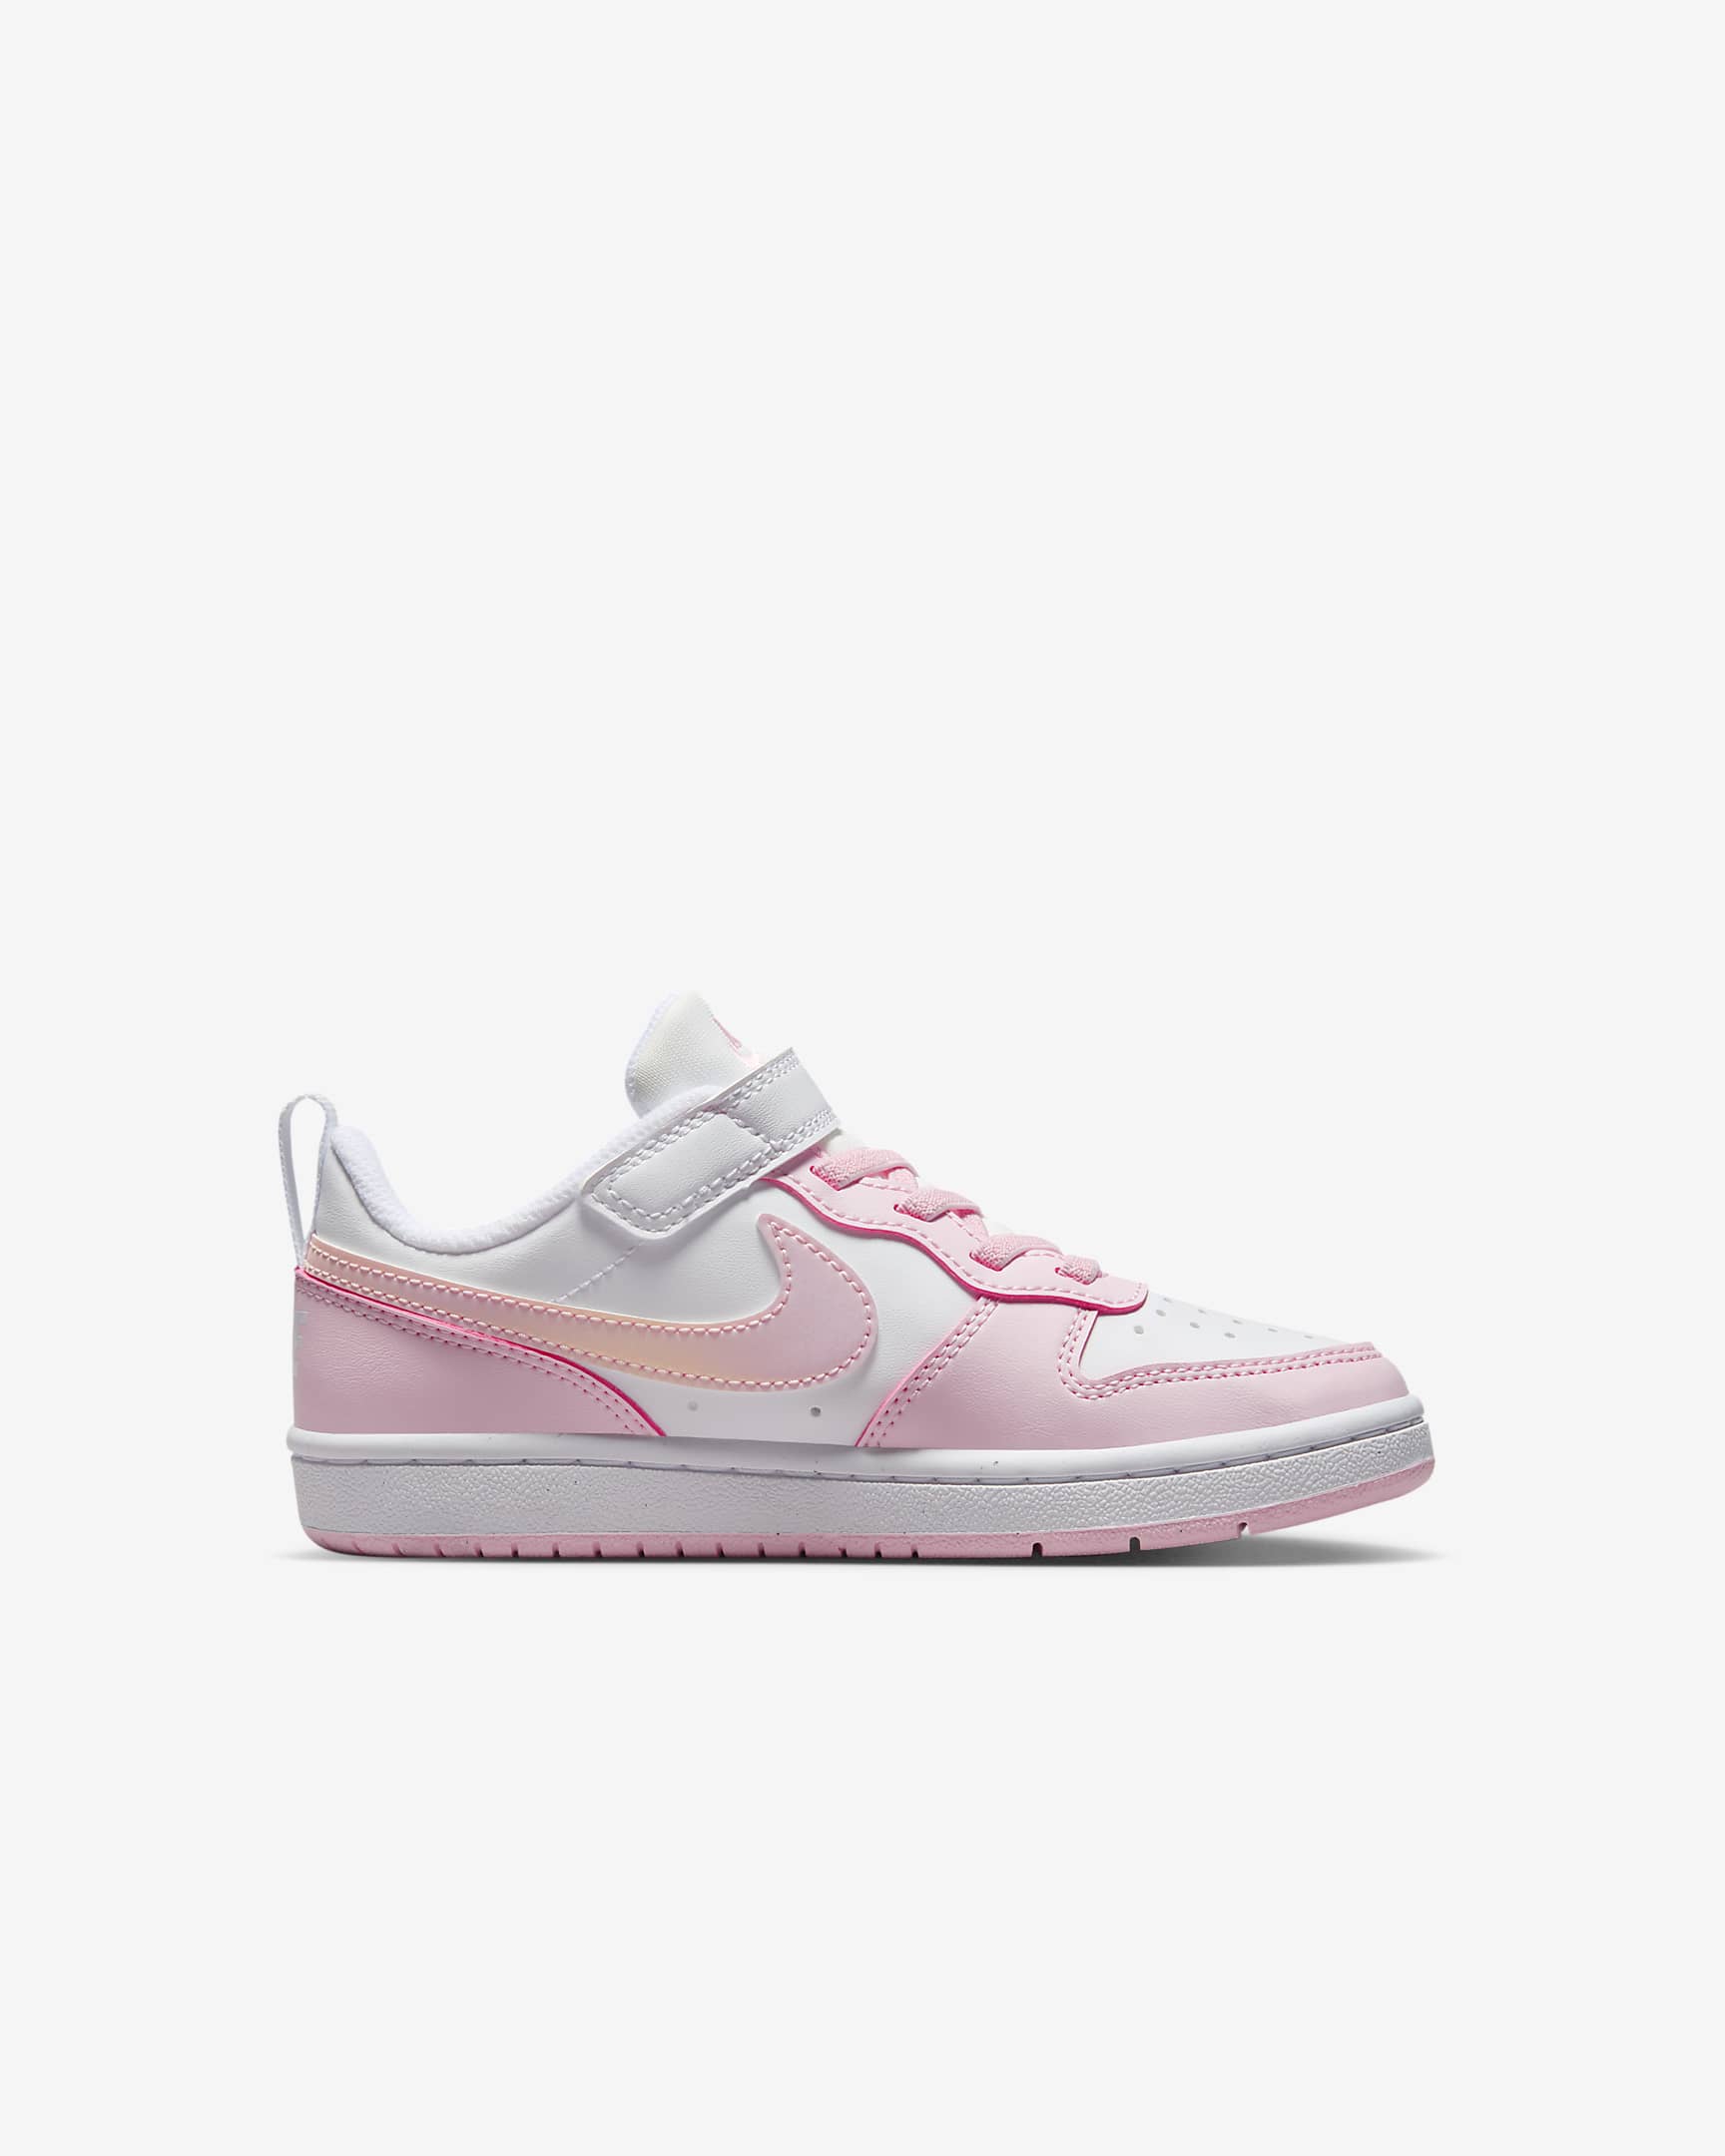 Nike Court Borough Low Recraft Younger Kids' Shoes - White/Pink Foam